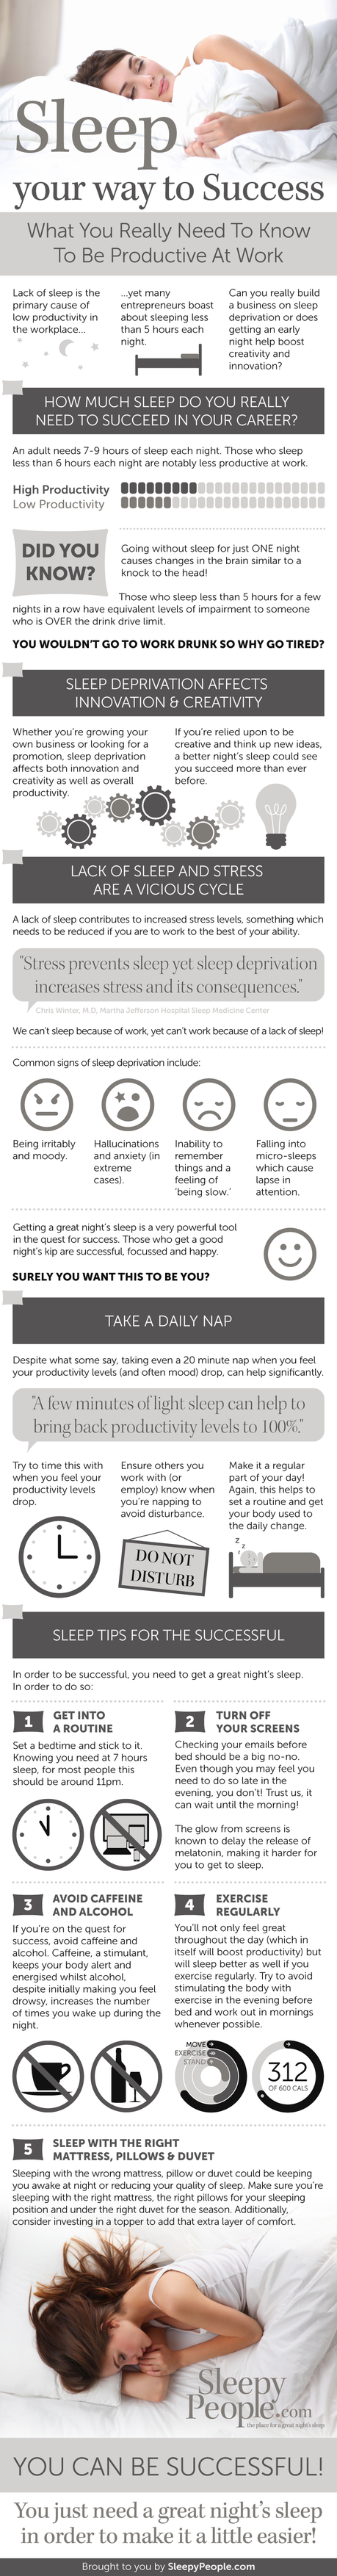 How To Sleep Your Way To Success